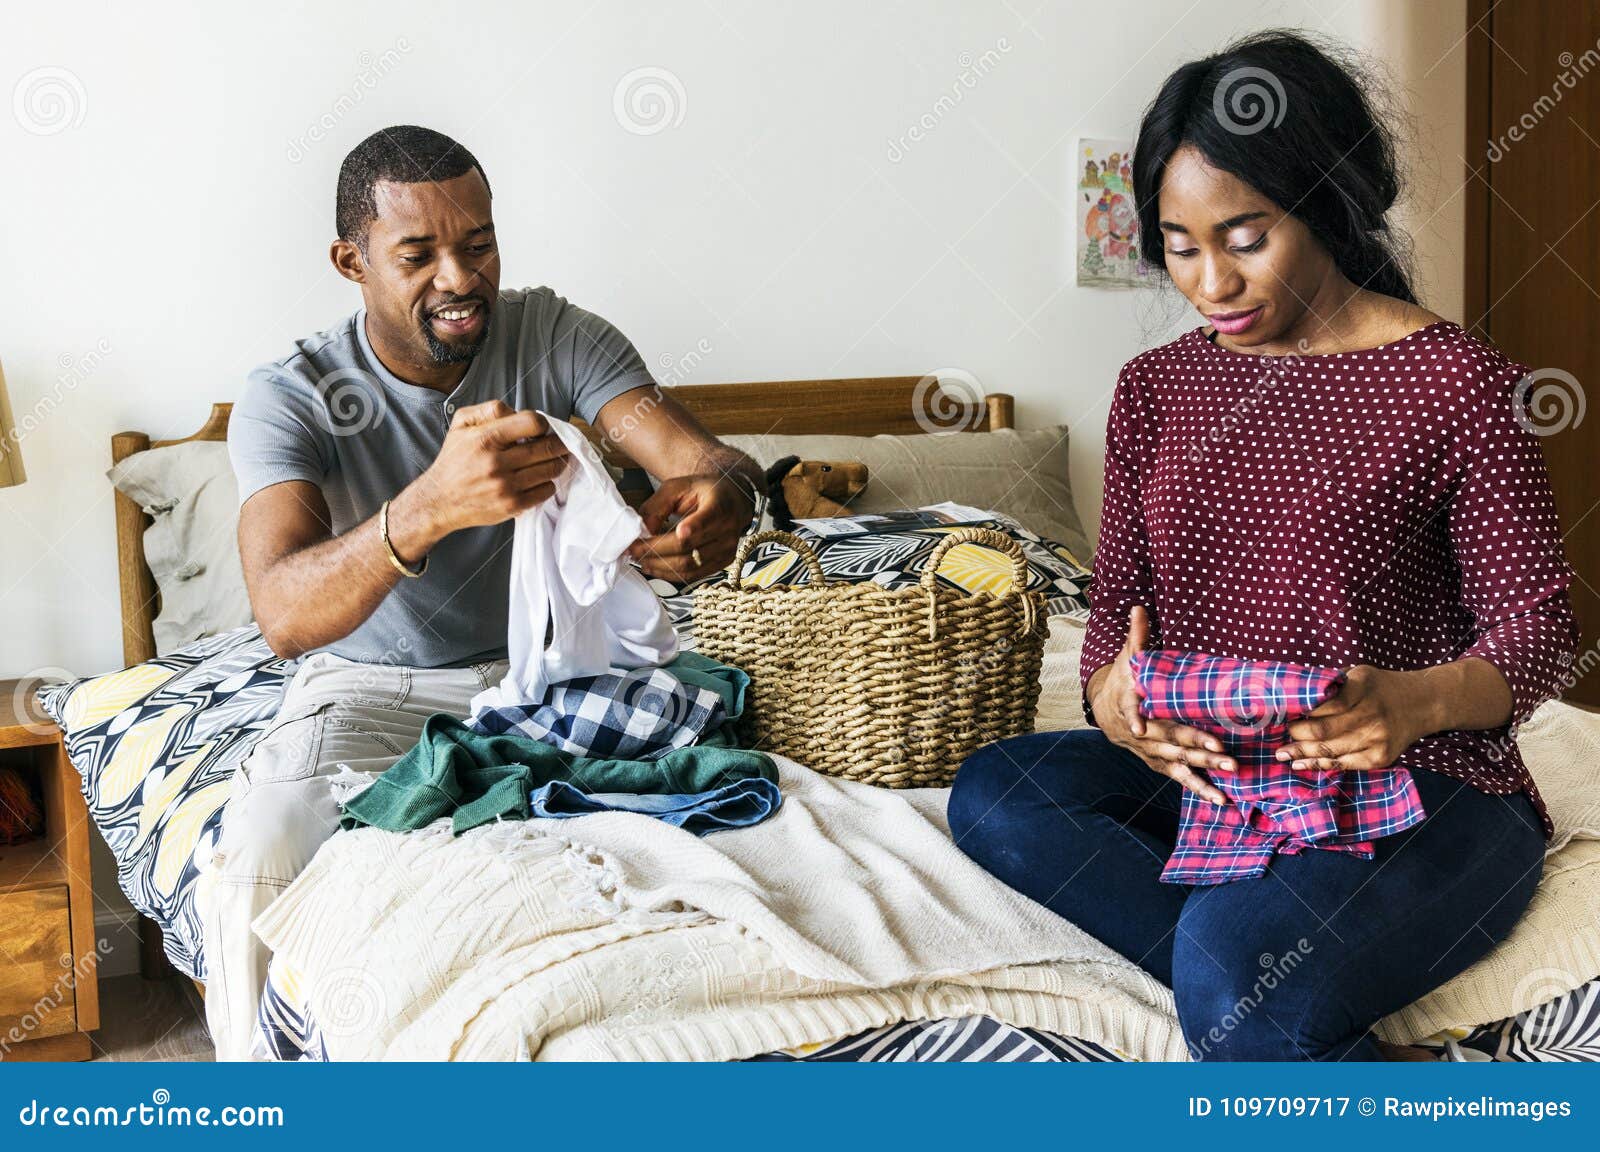 black couple folding clothes together